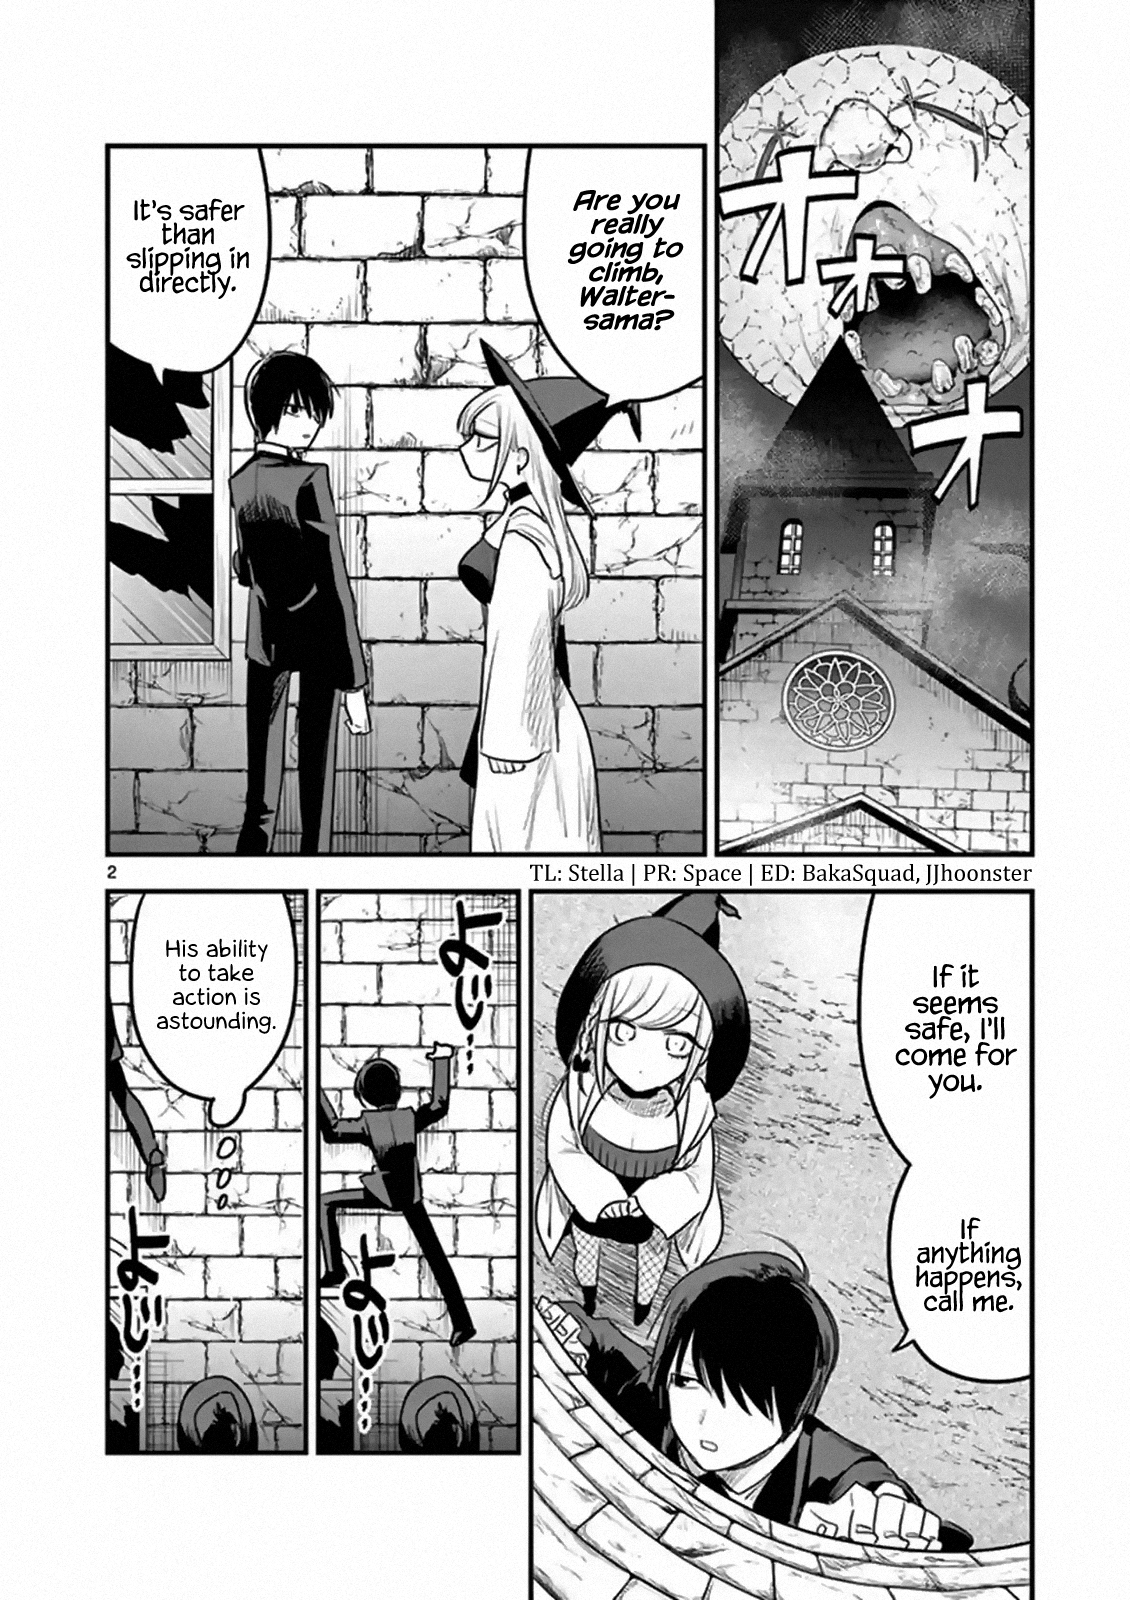 The Duke Of Death And His Black Maid - Page 2